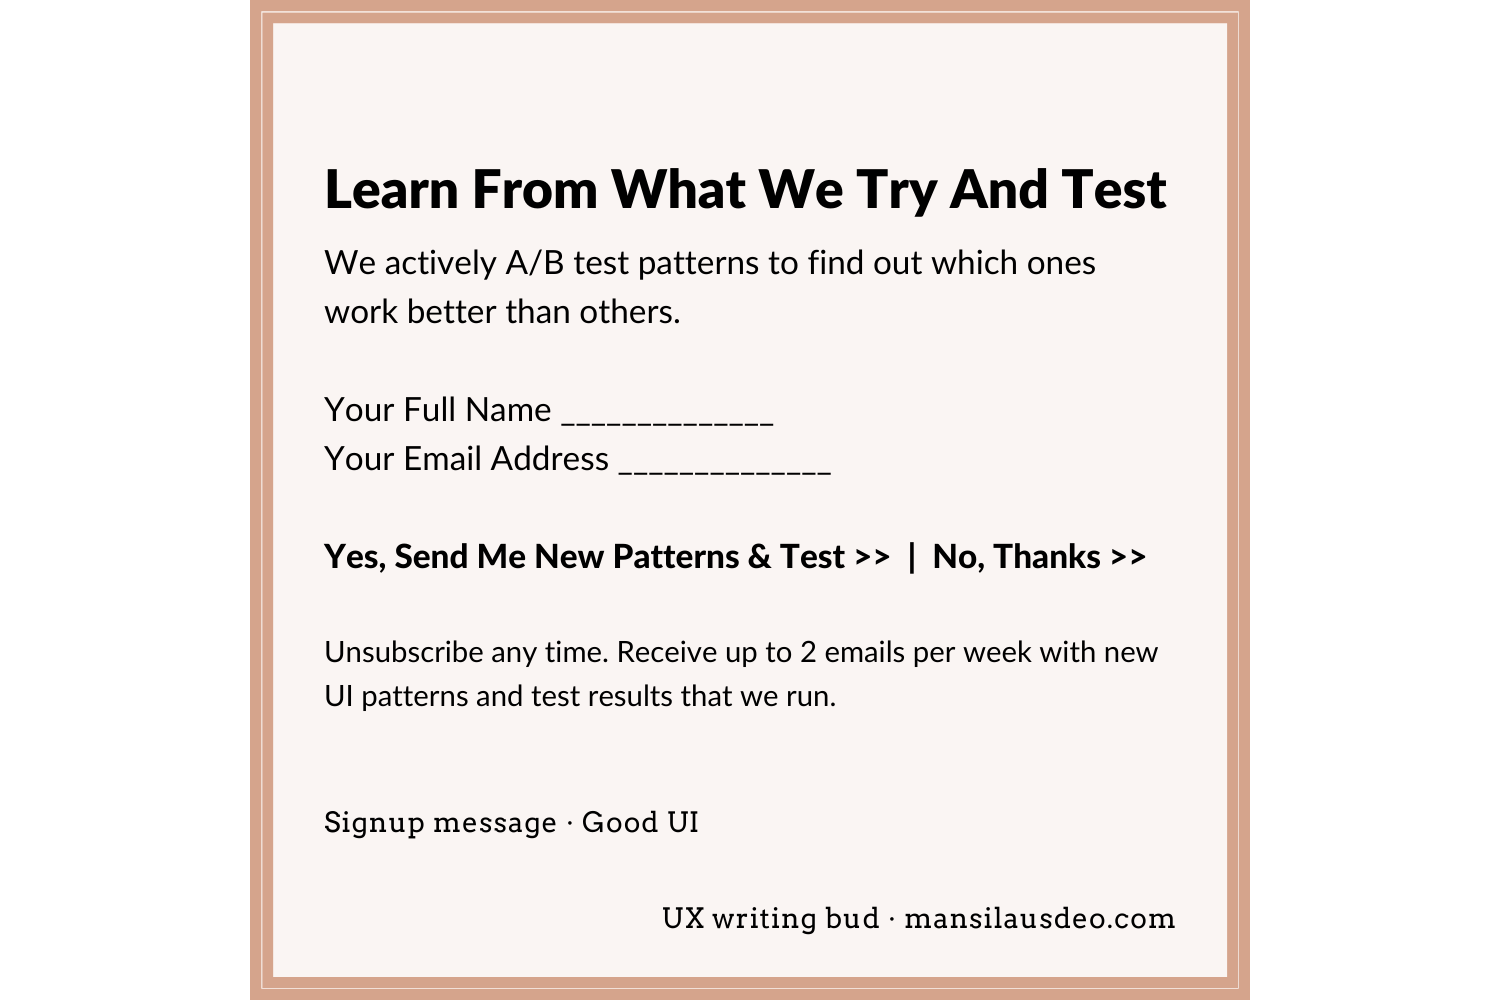 Learn From What We Try And Test We actively A/B test patterns to find out which ones work better than others. Your Full Name __________ Your Email Address __________ Yes, Send Me New Patterns & Test >> | No, Thanks >> Unsubscribe any time. Receive up to 2 emails per week with new UI patterns and test results that we run. Signup • GoodUI UX writing bud